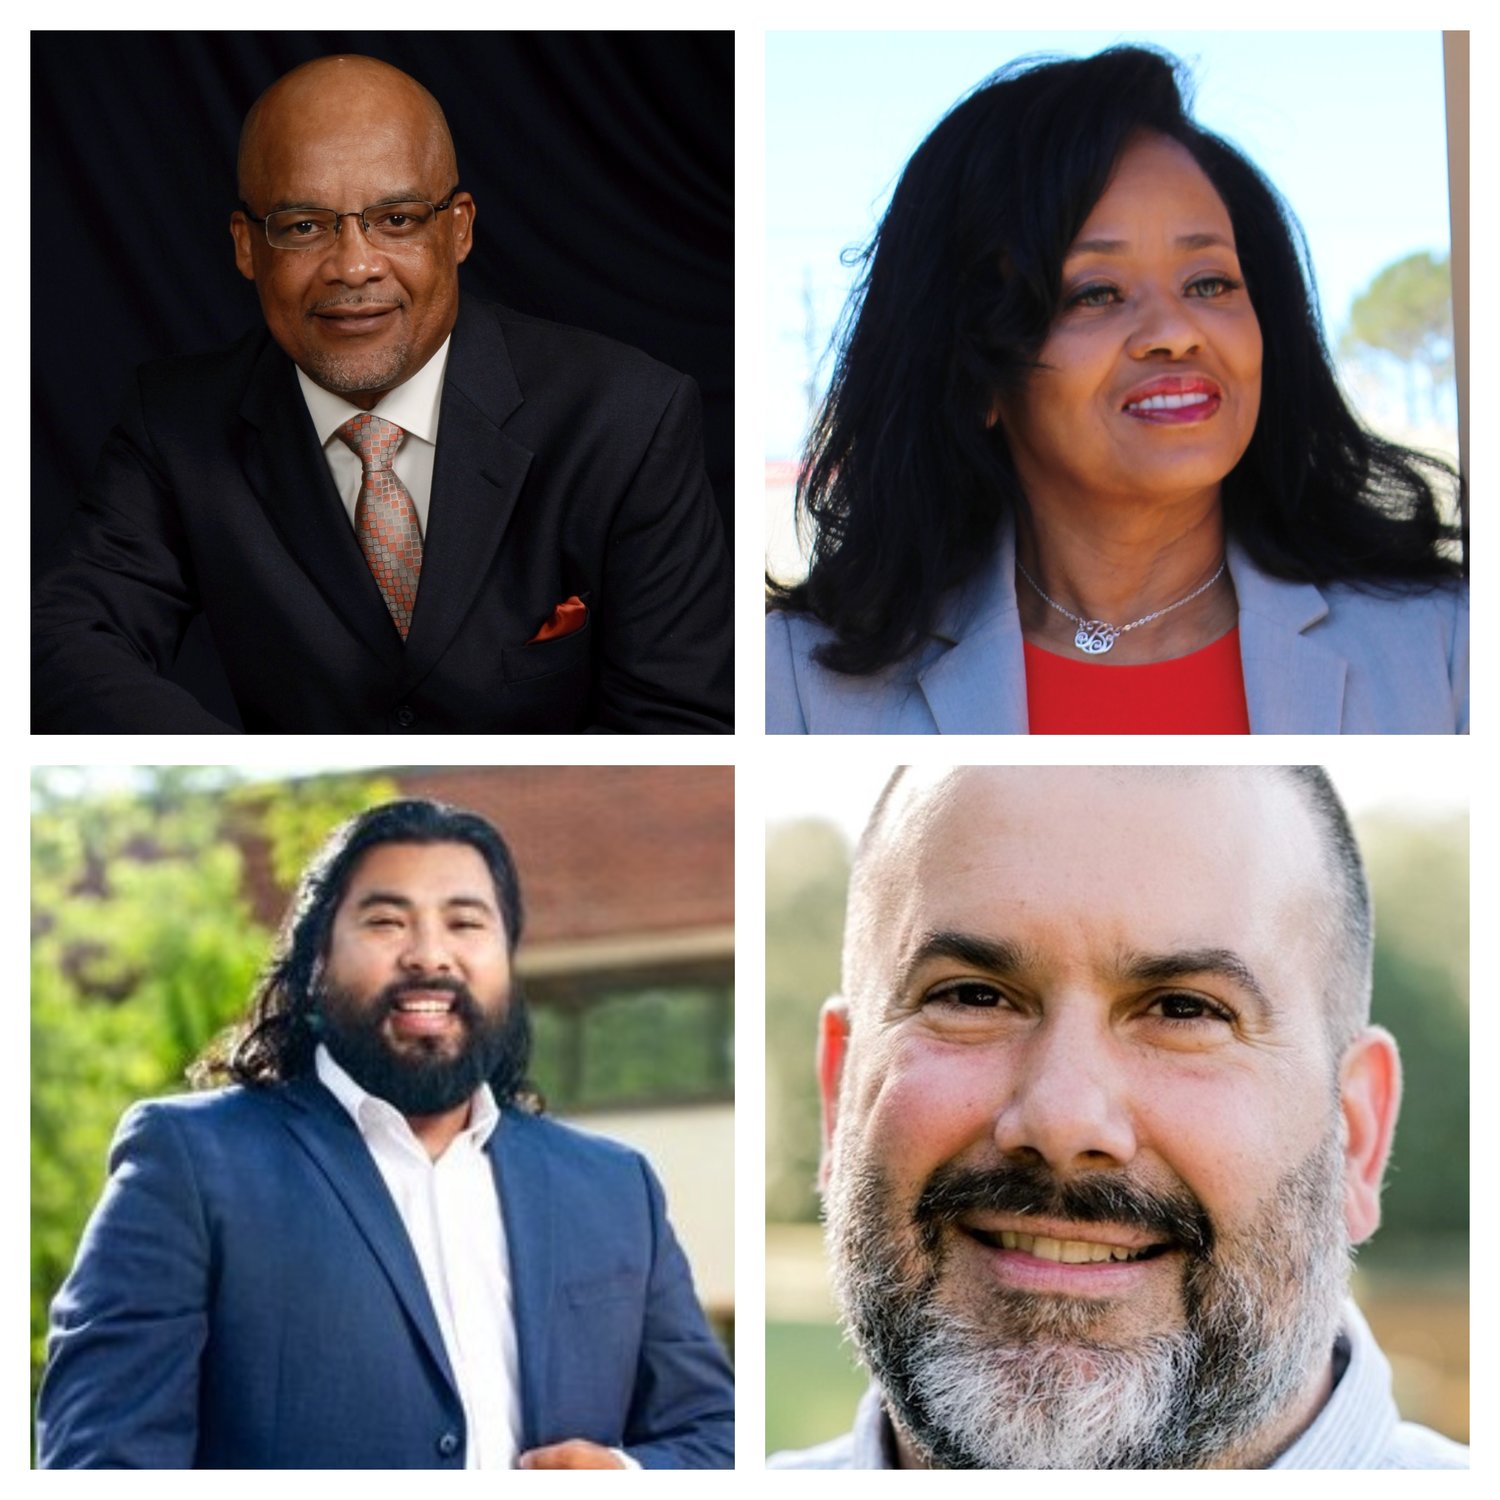 The Fayetteville City Council will see four new members, according to unofficial returns. They are: top, from left: Derrick Thompson and Brenda McNair; and bottom, from left, Mario Benavente and  Deno Hondros.